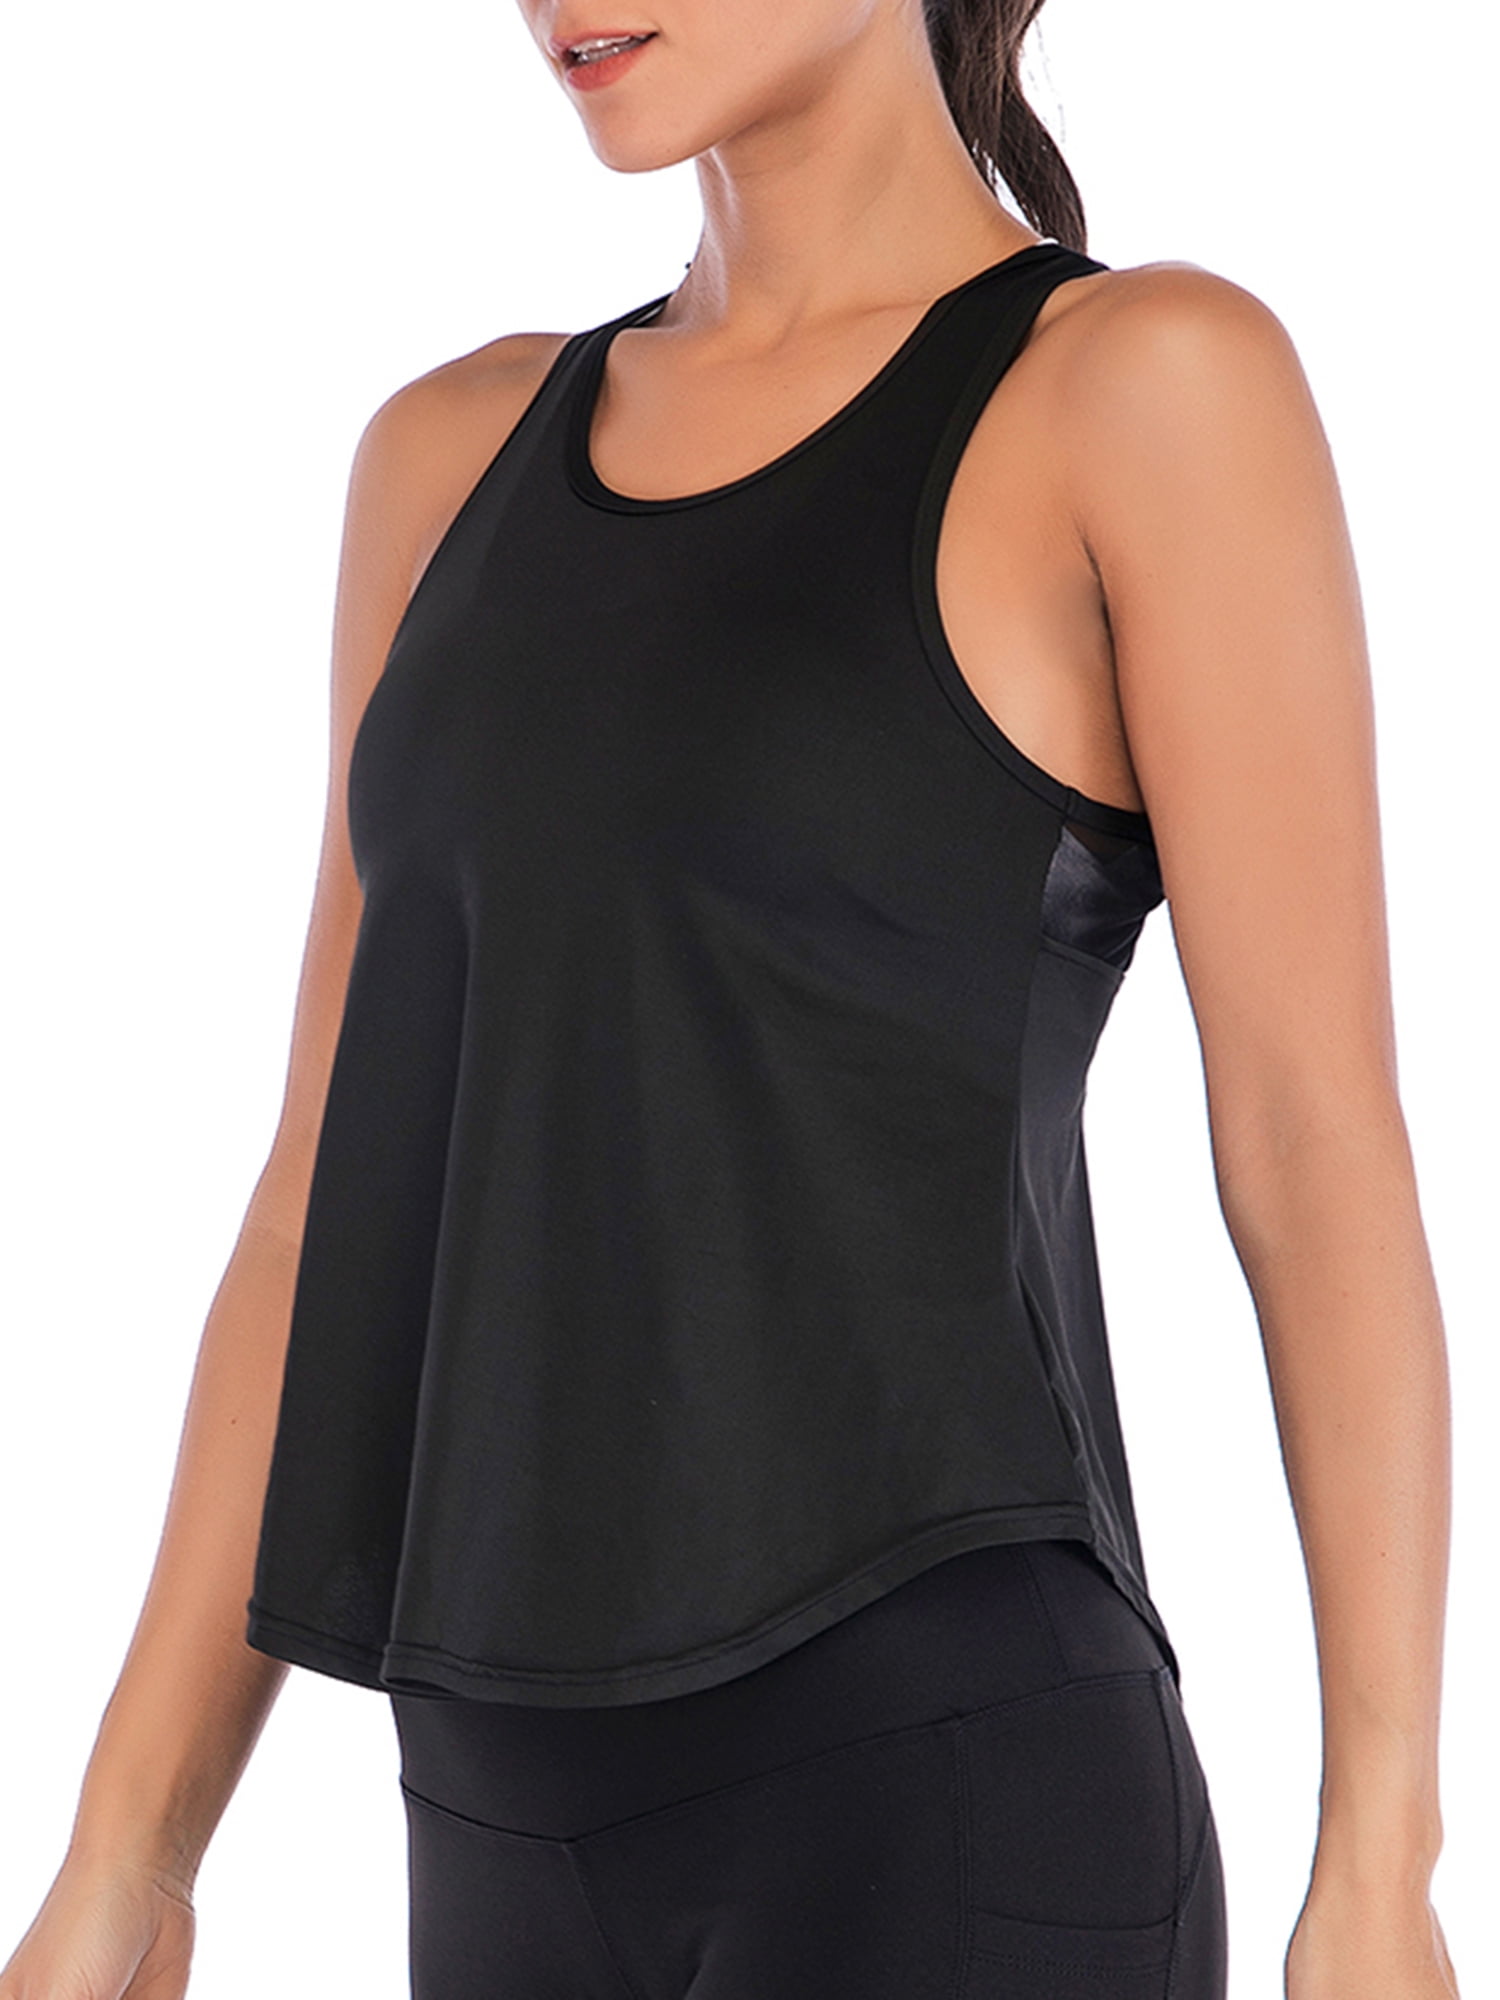 YouLoveIt Womens Yoga Vest Gym Sports Tops Shirts Quick Dry Yoga ...